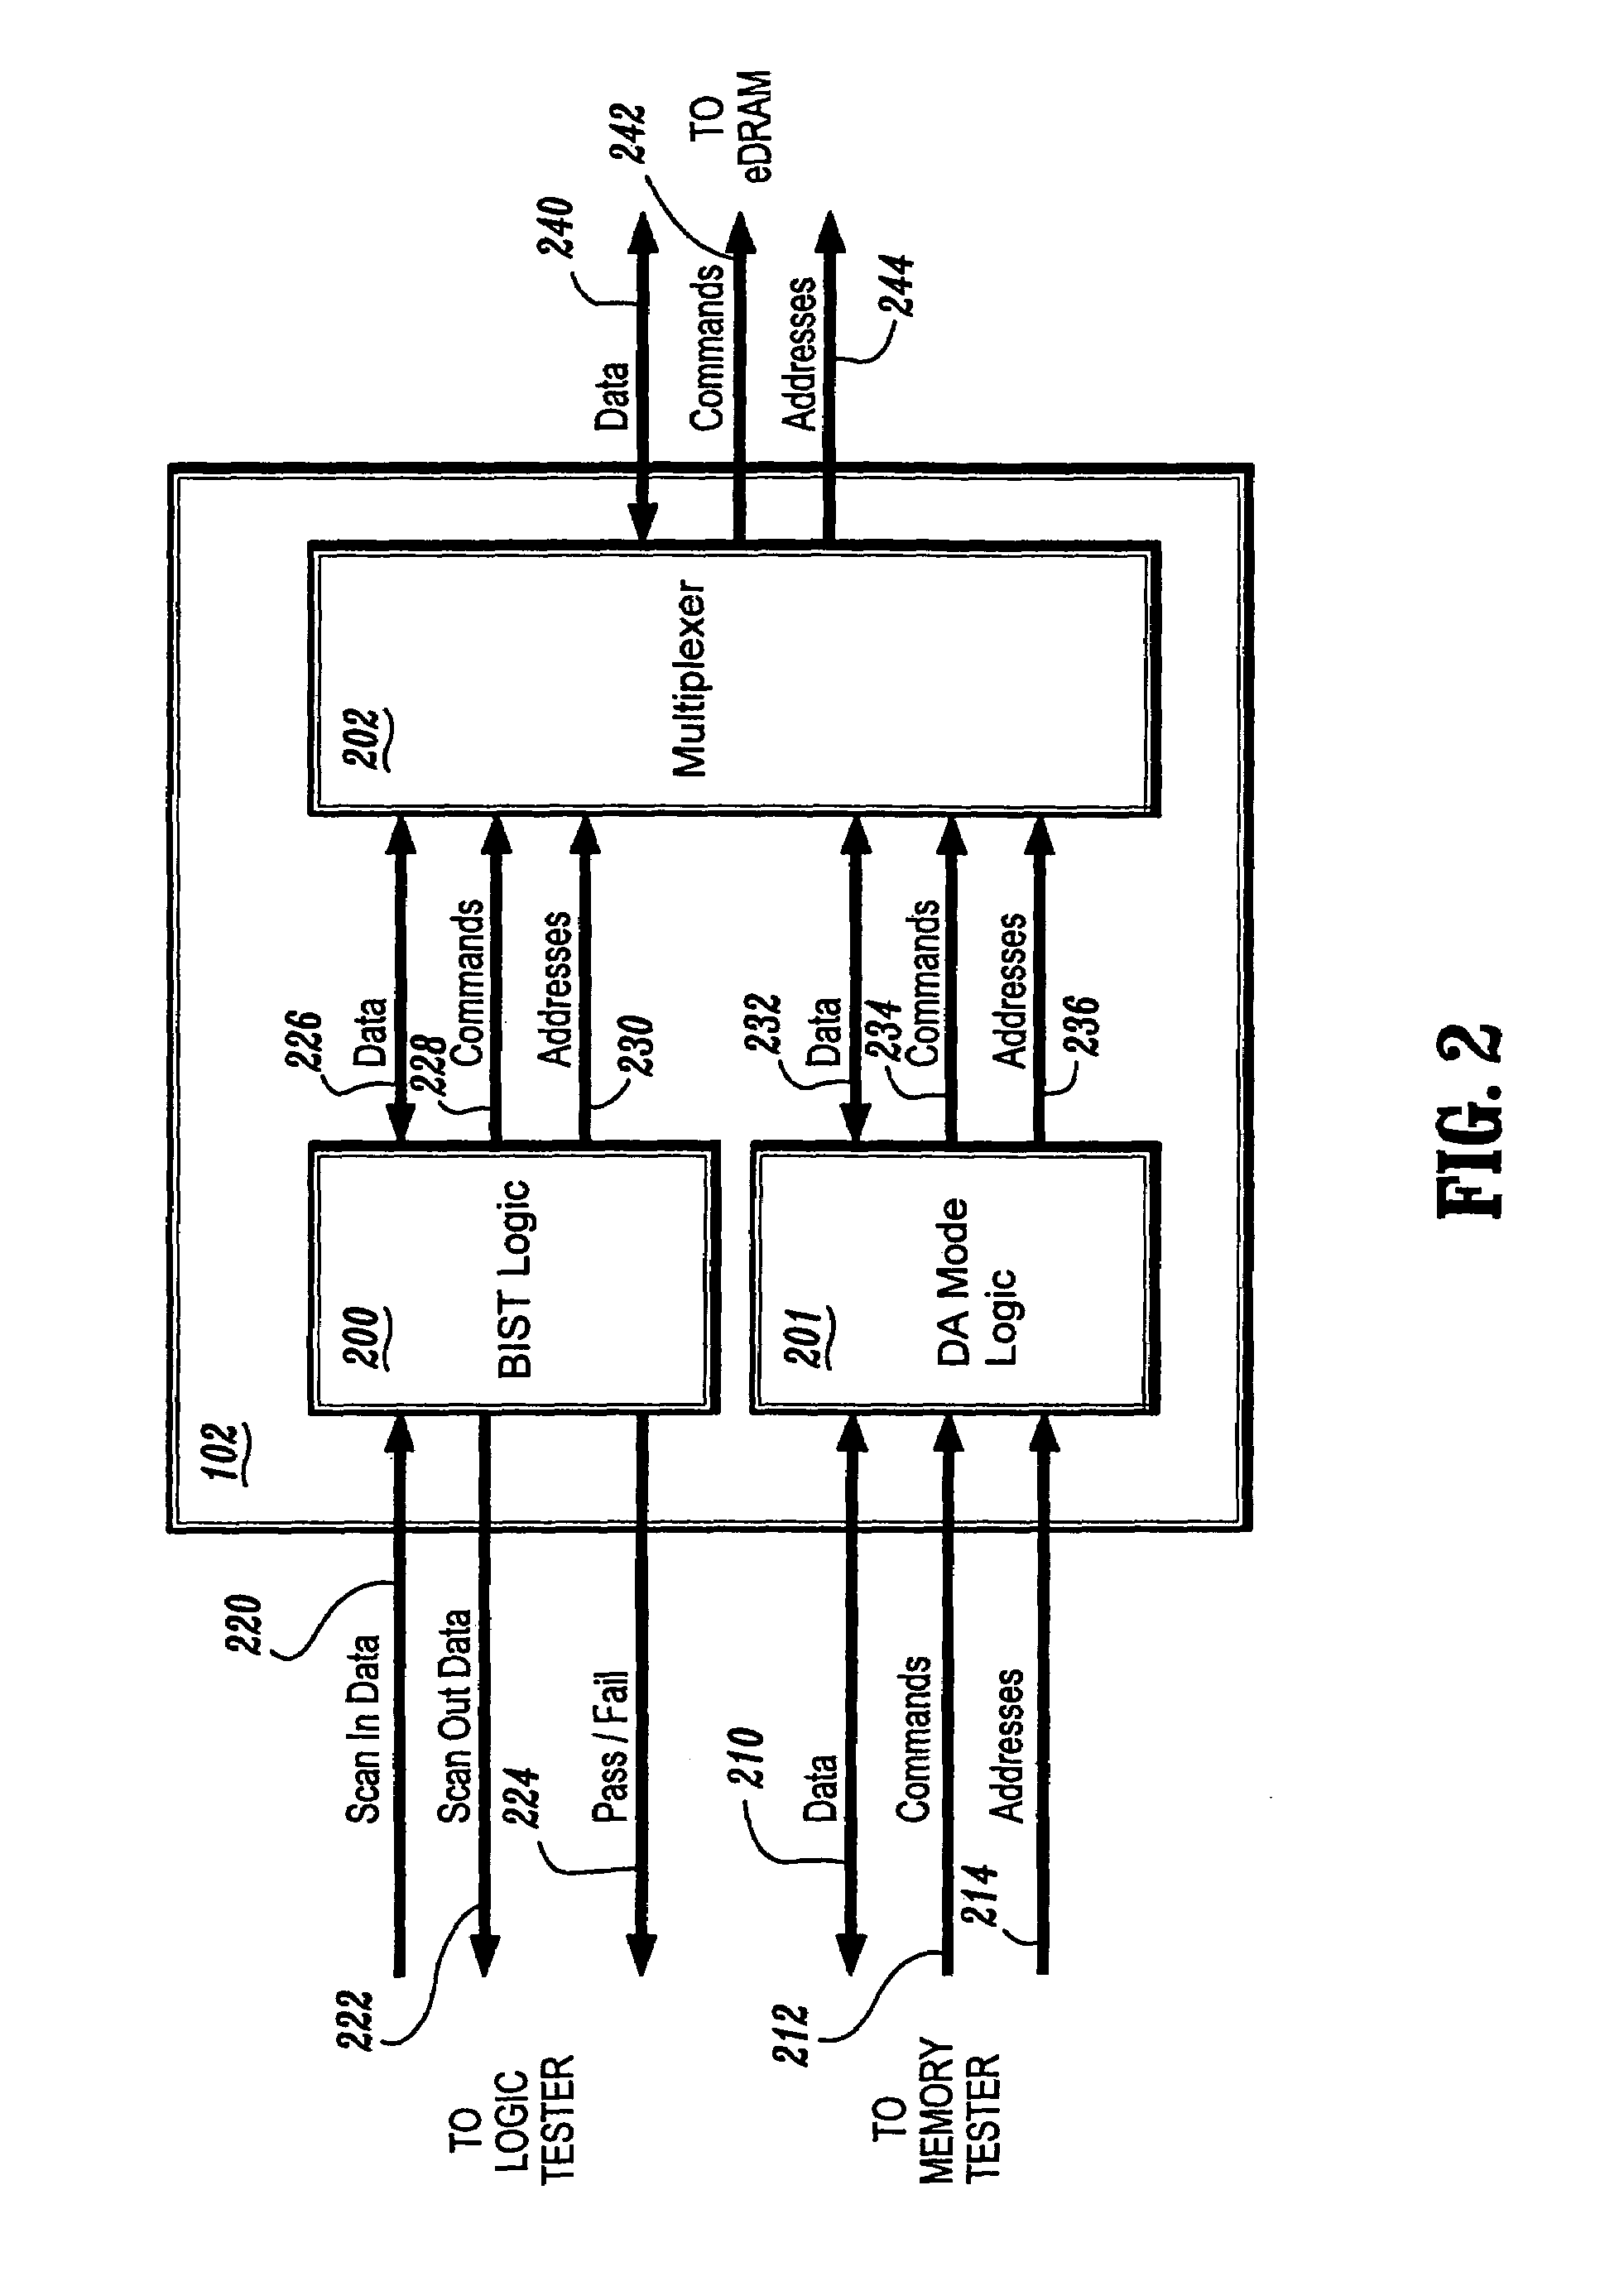 Circuit and method for testing embedded DRAM circuits through direct access mode